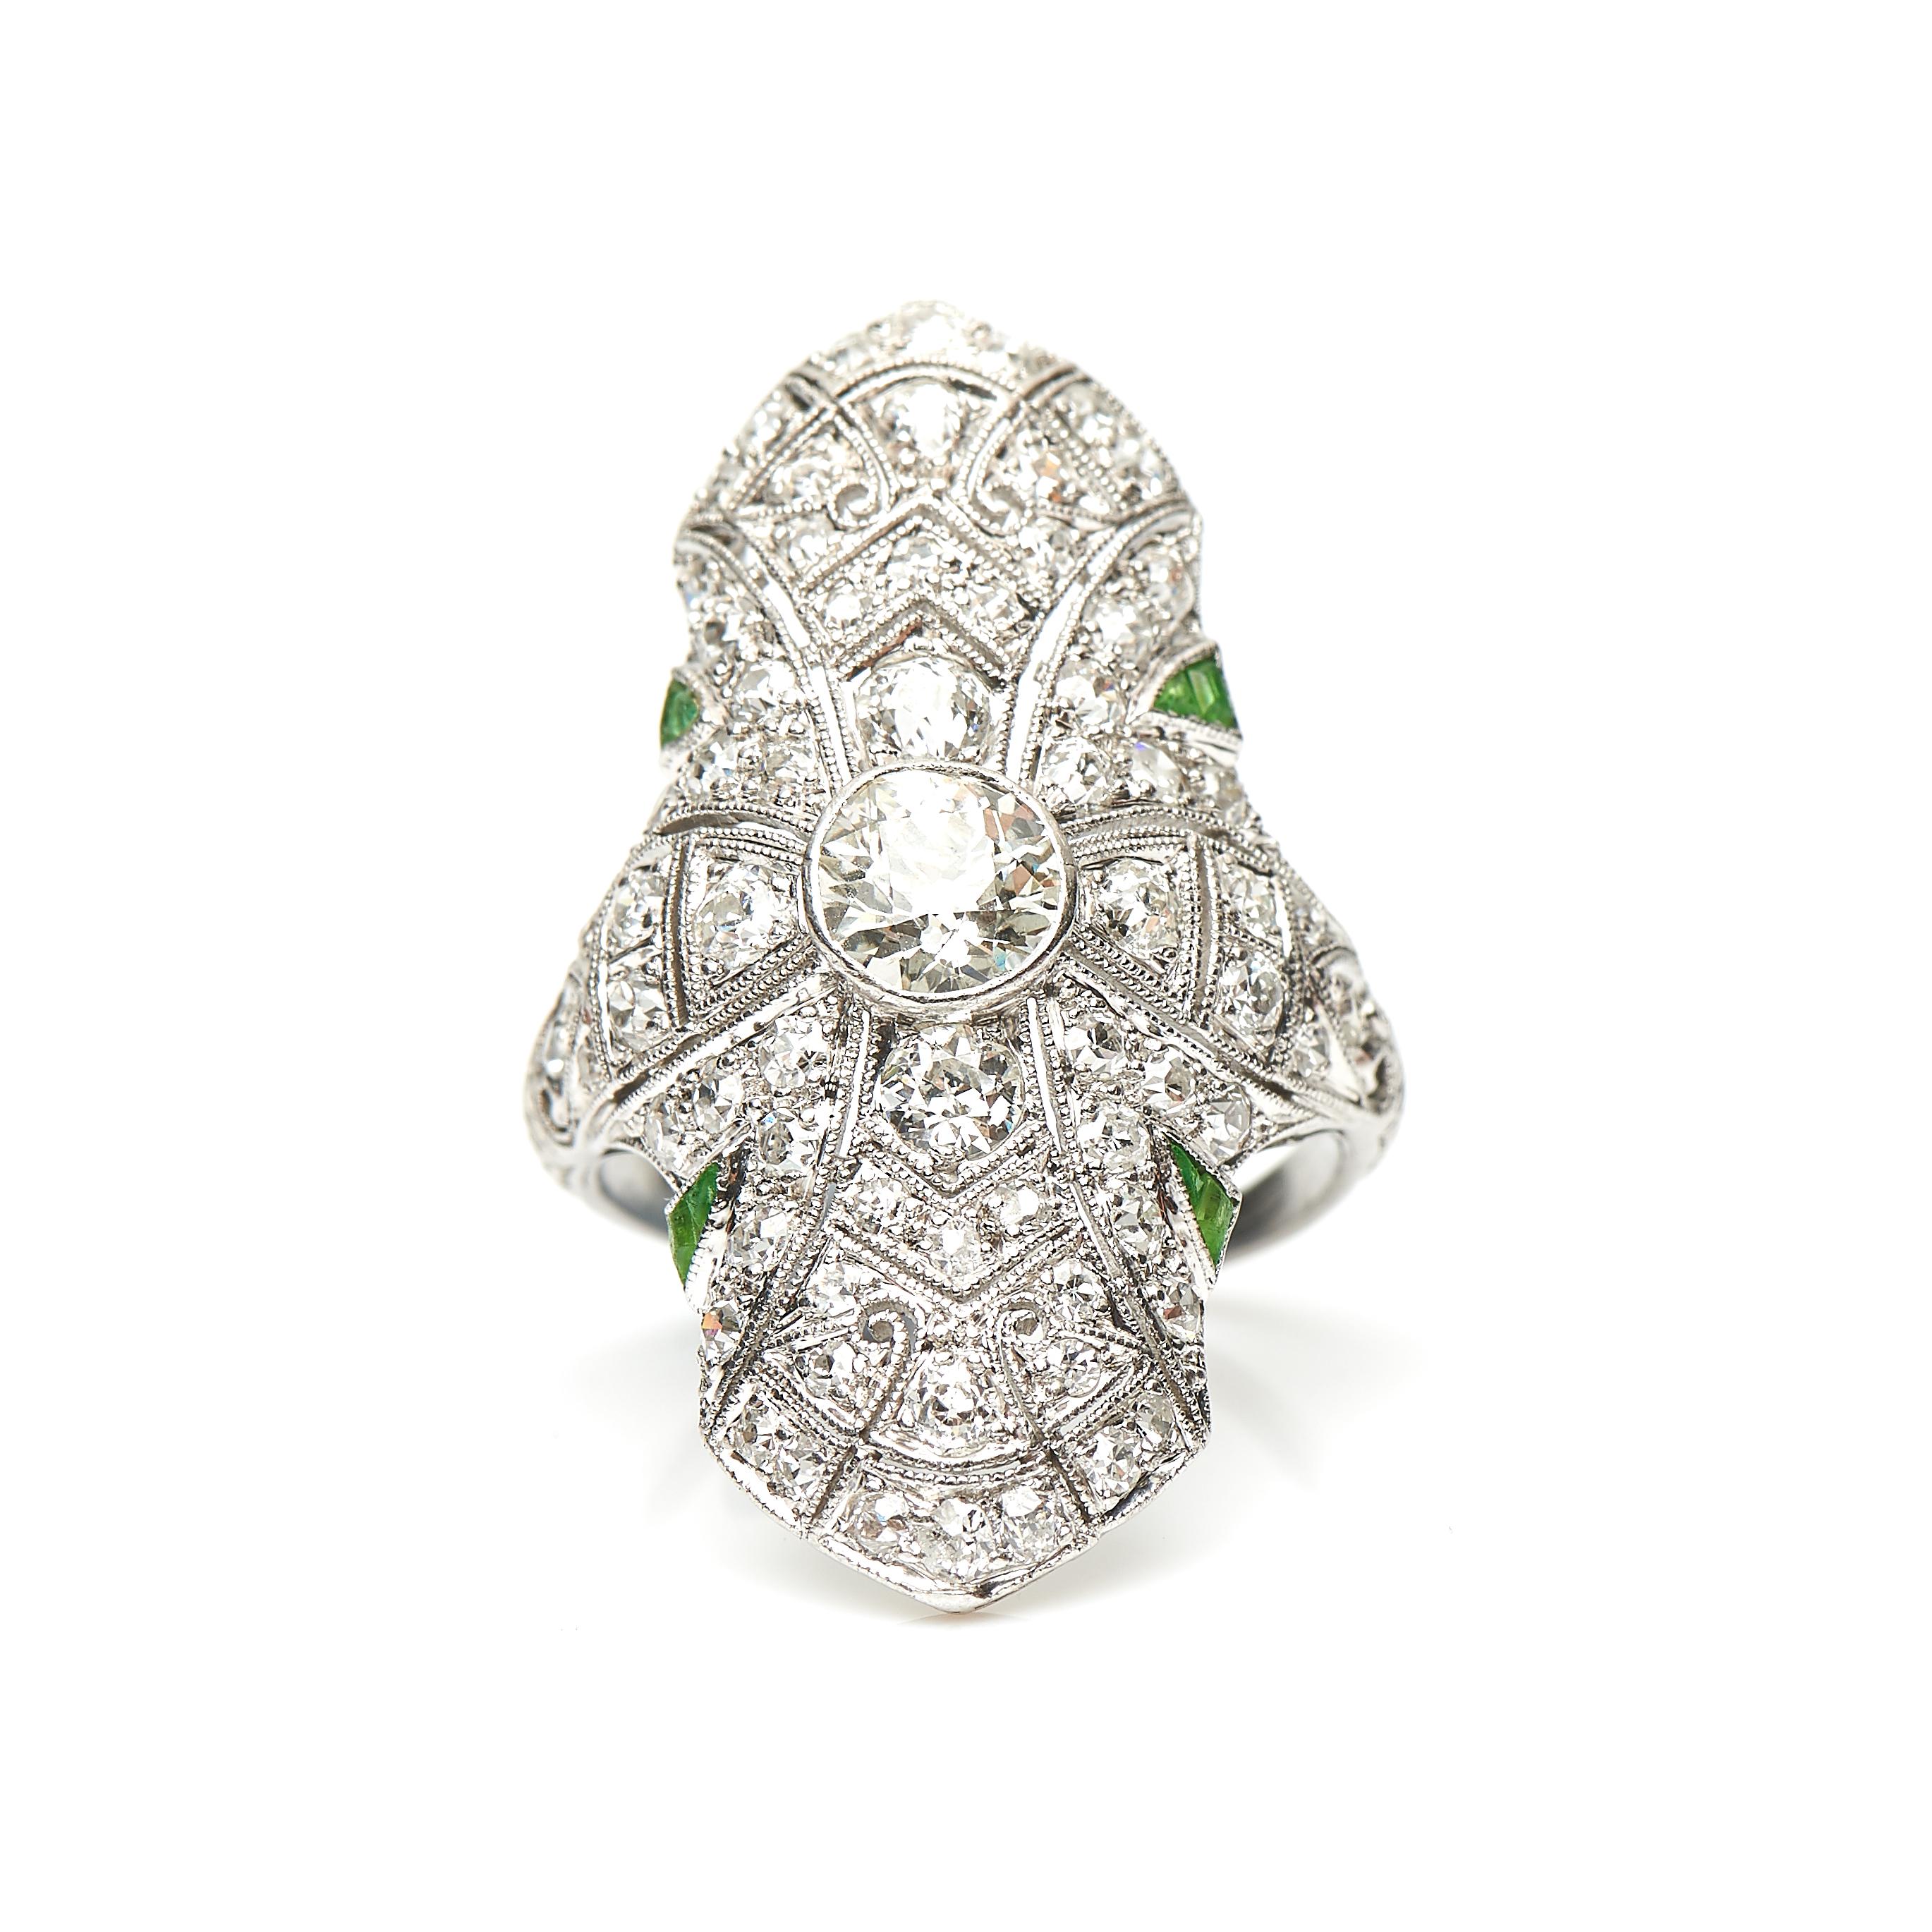 Art Deco, diamond and demantoid garnet ring, circa 1920. An impressive and stylish ring set with old cut diamonds and tapered green garnets adorn the shoulders to add a touch of colour. The diamonds have a beautiful sparkle, all set in platinum with